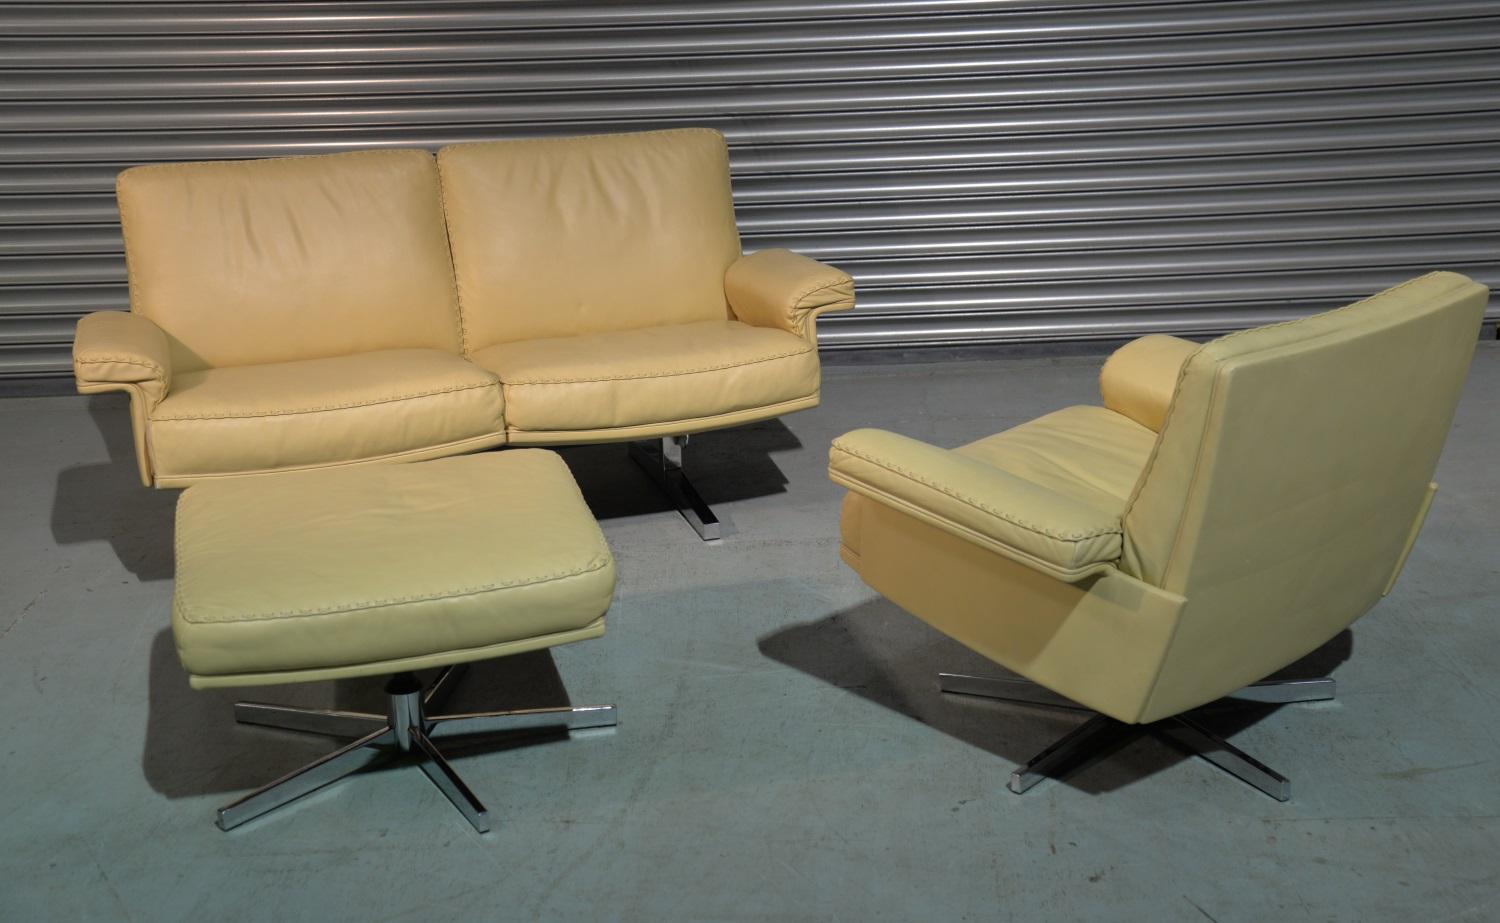 We are delighted to bring to you an extremely rare vintage De Sede DS 35 two-seat sofa and matching swivel lounge armchair and ottoman in beautiful soft cream leather with superb whipstitch edge detail. Hand built in the 1970s by de Sede craftsman